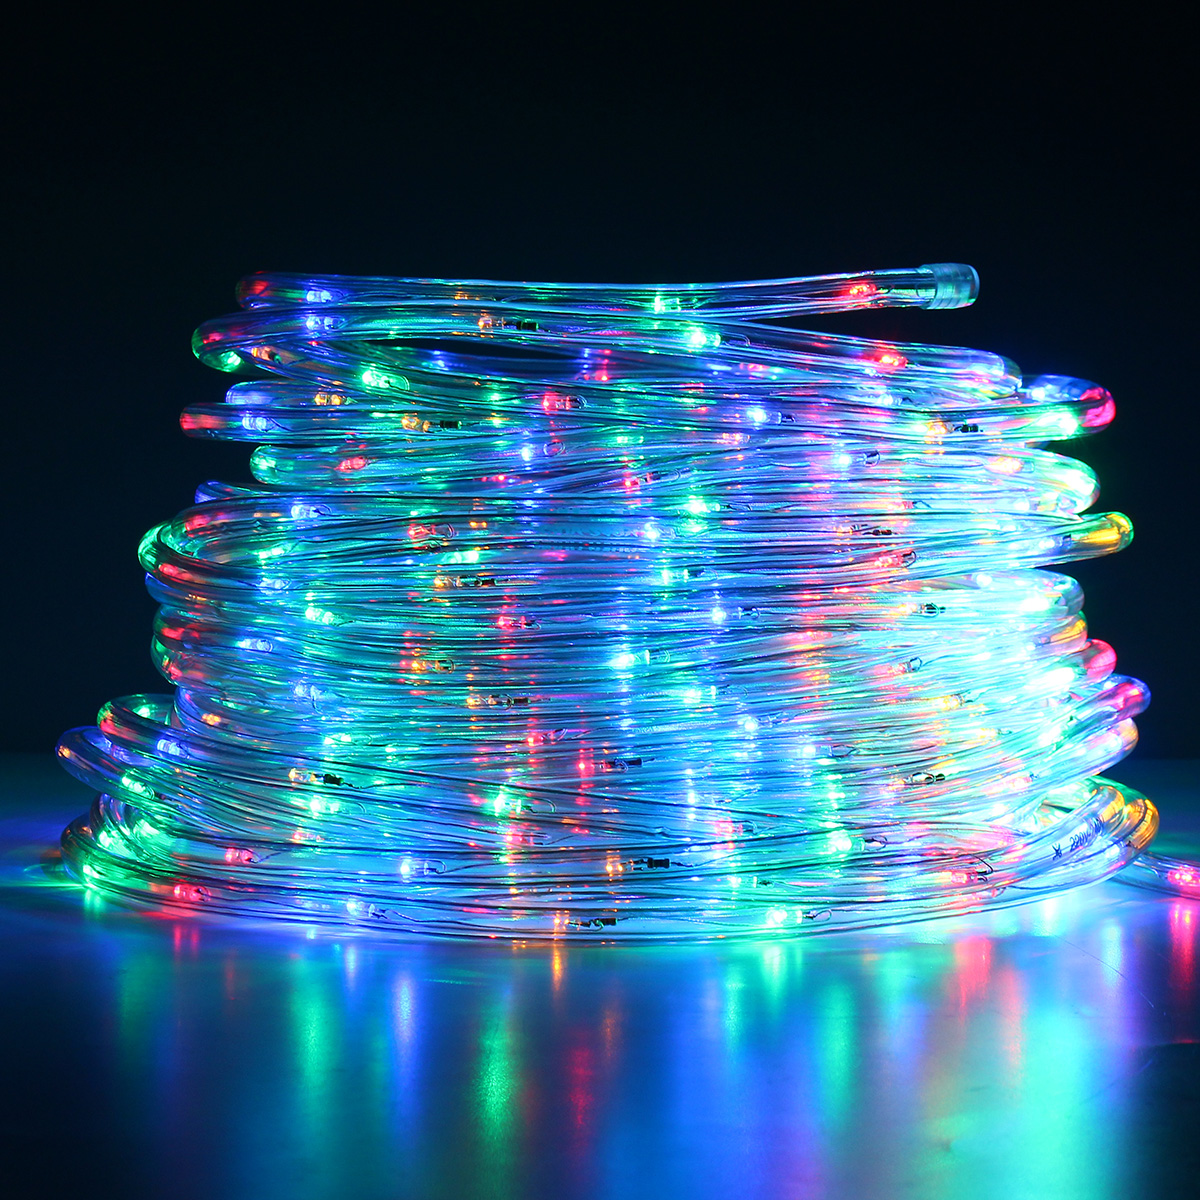 Find 20M SMD3014 Waterproof Flexible 320LEDs Tape Ribbon Strip Light Colorful Warm White White AC220V  for Sale on Gipsybee.com with cryptocurrencies